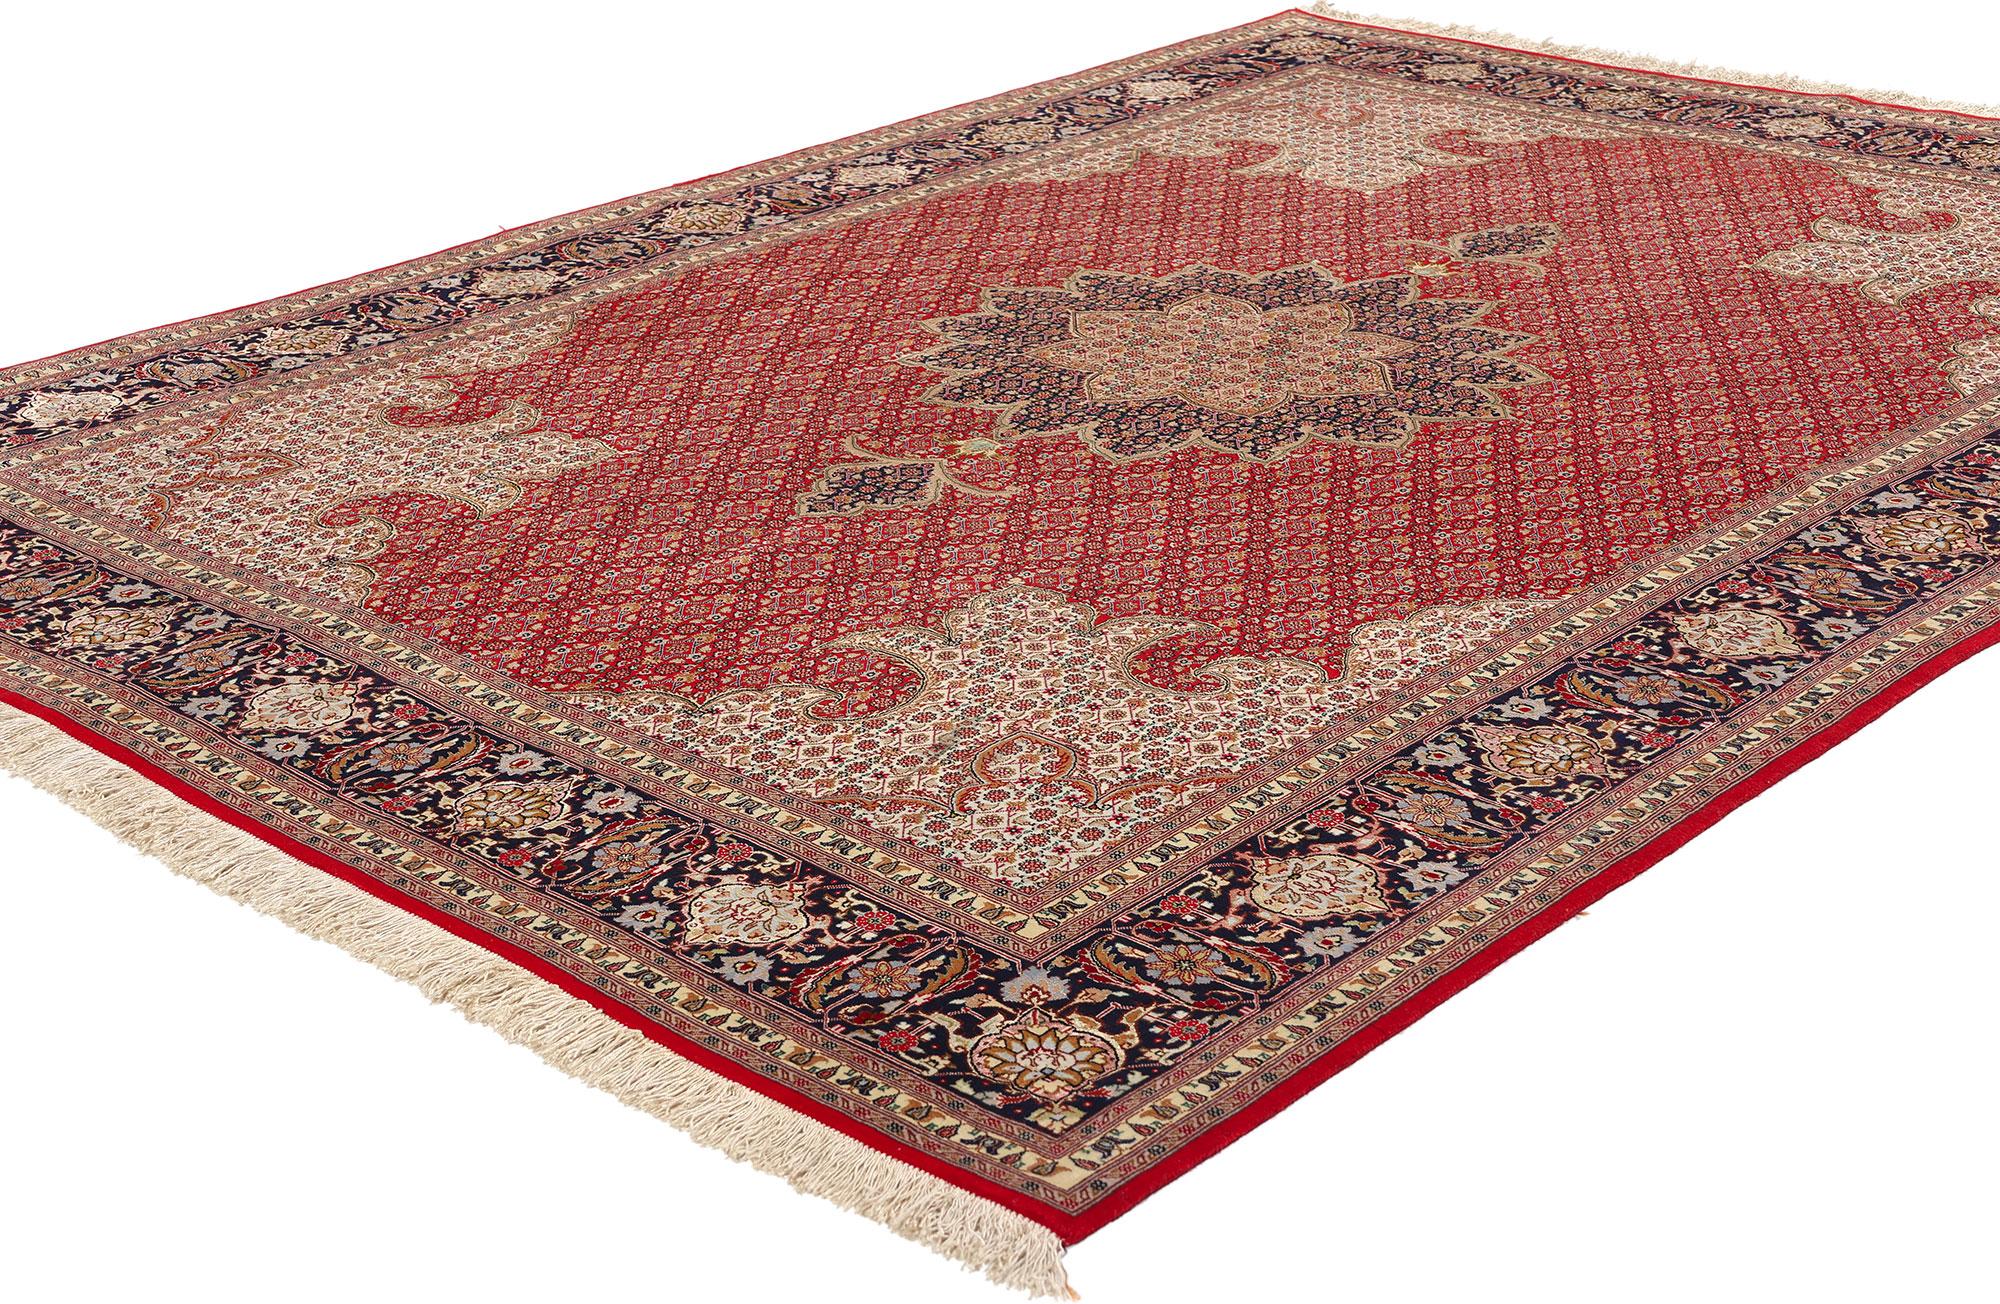 77001 Vintage Persian Mahi Tabriz Rug, 04'11 x 06'10. Situated among the Sahand Evnali mountains in Azerbaijan, Iran, the Quru Valley reveals the enchanting city of Tabriz, renowned for its exceptional handcrafted carpets. Tabriz holds a